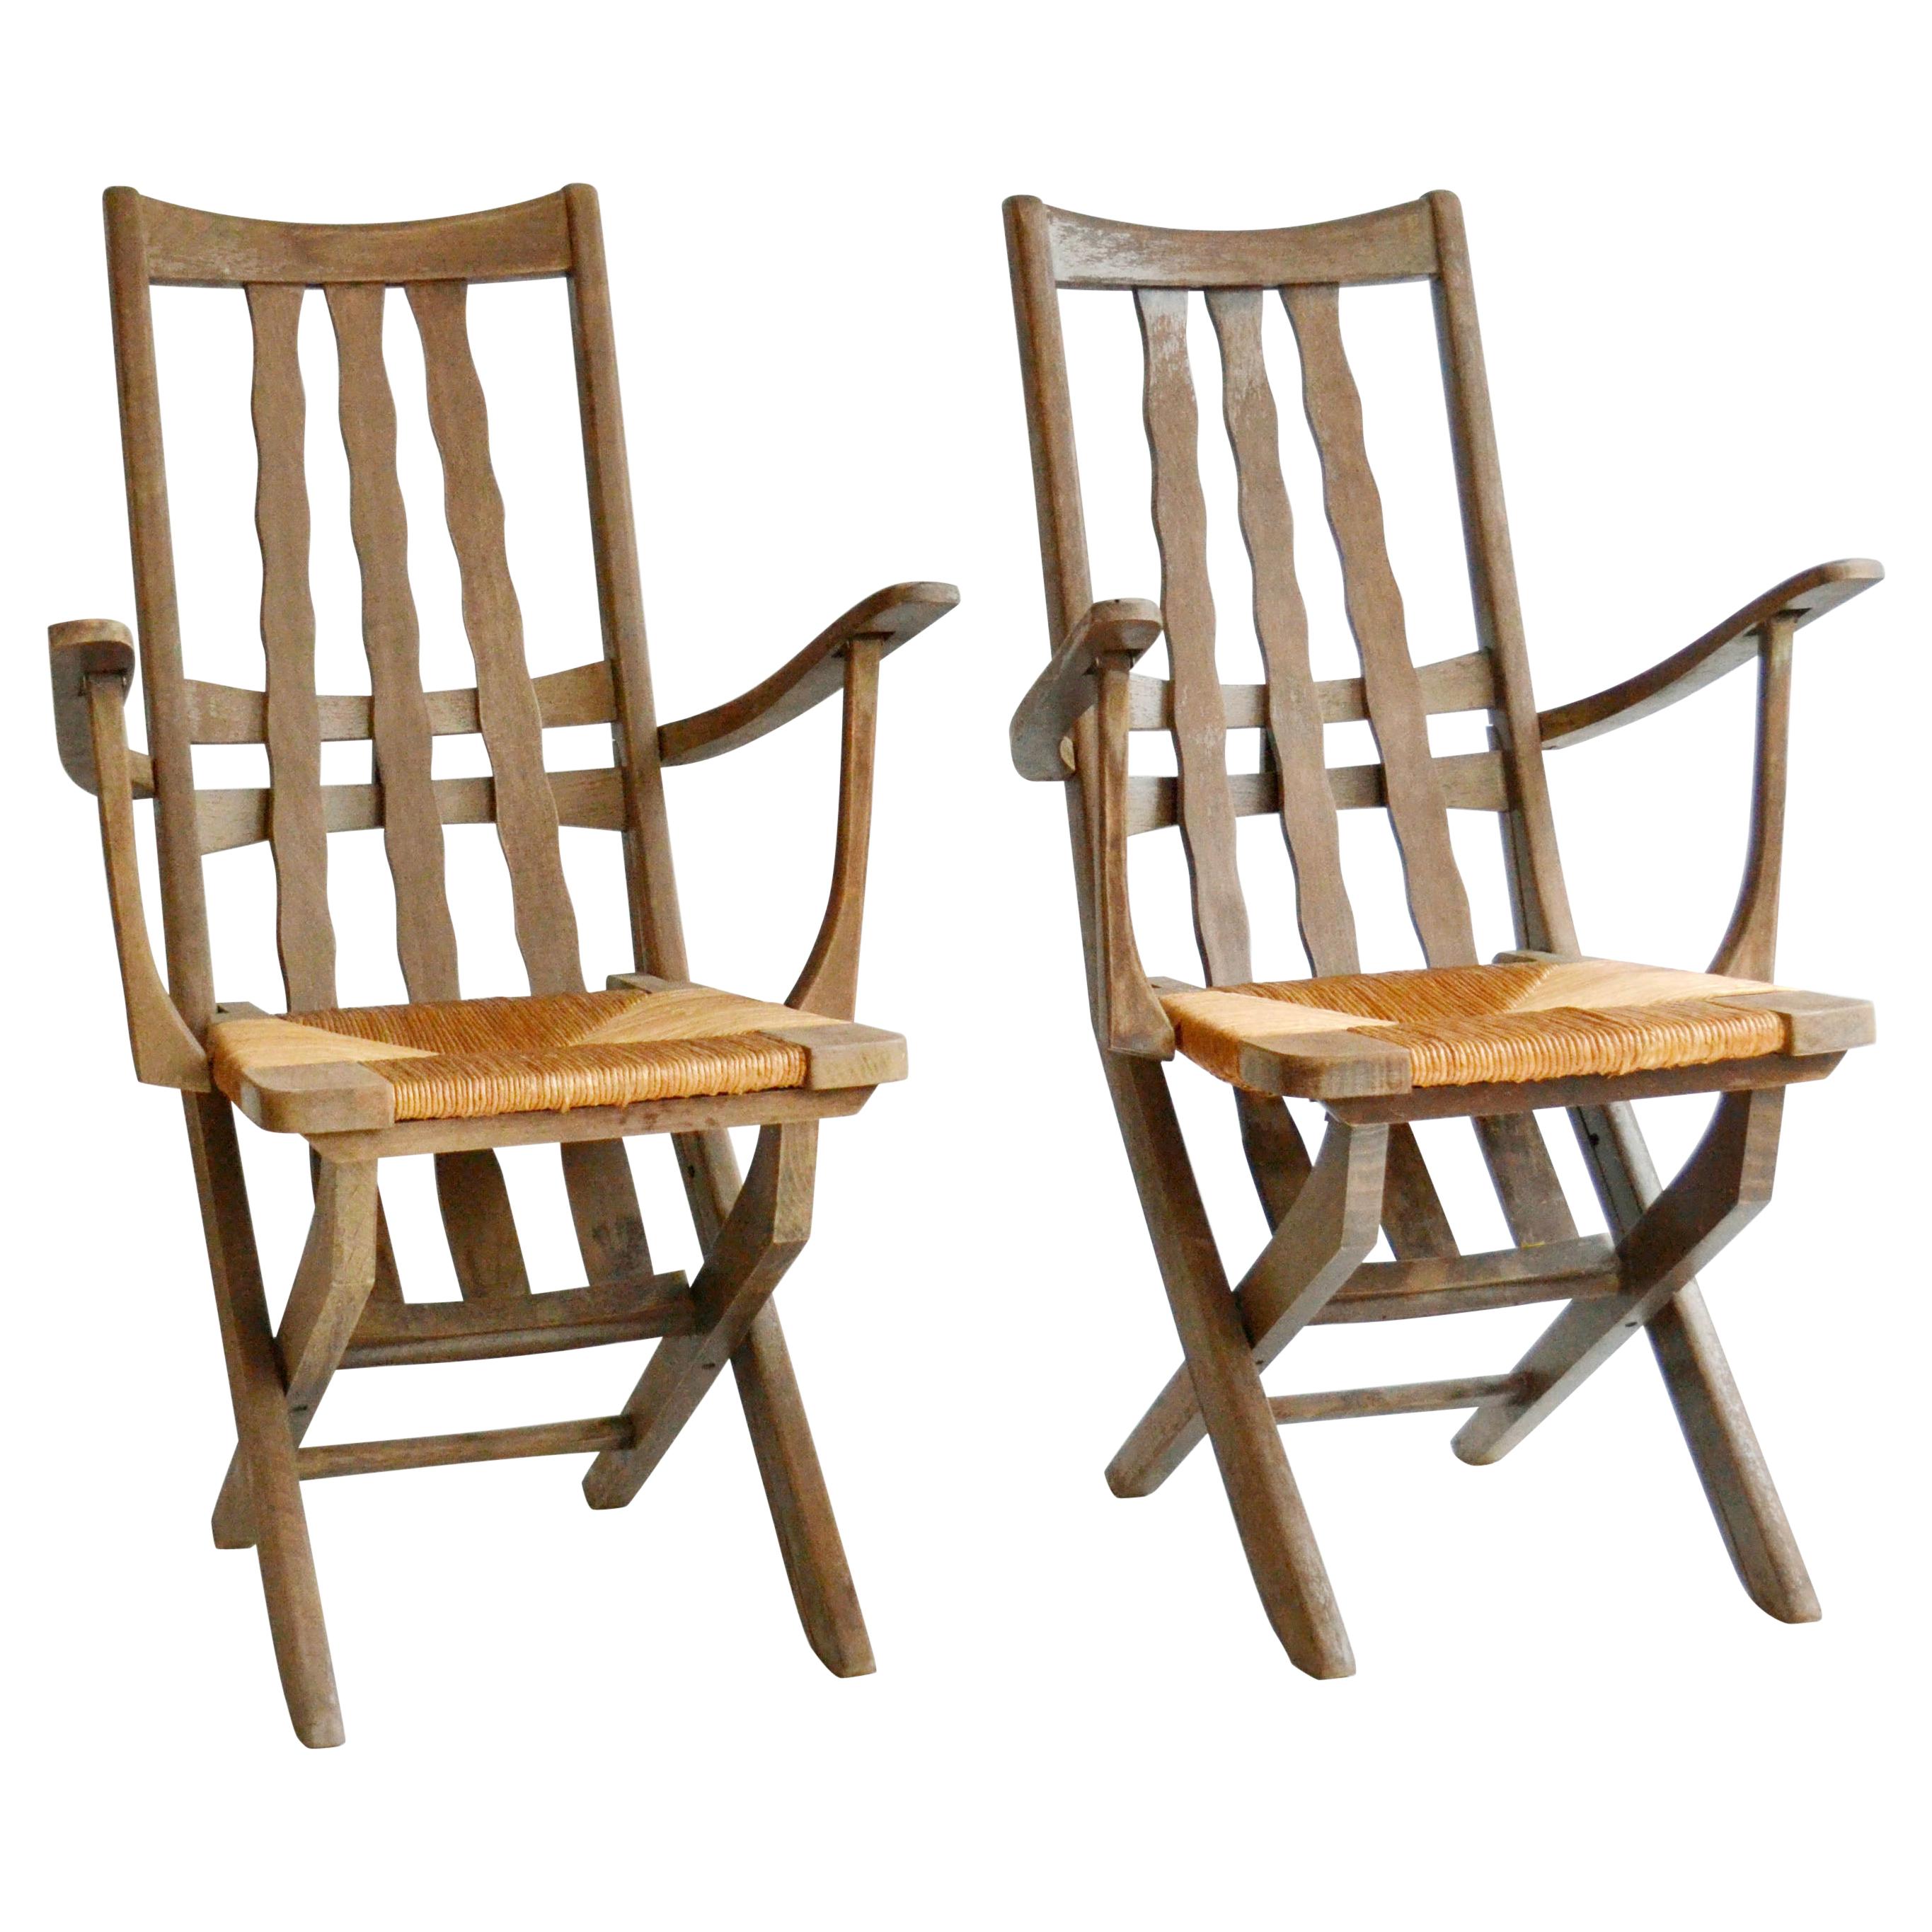 Pair of French Modernist Outdoor Oak Chairs, French, 1950s For Sale